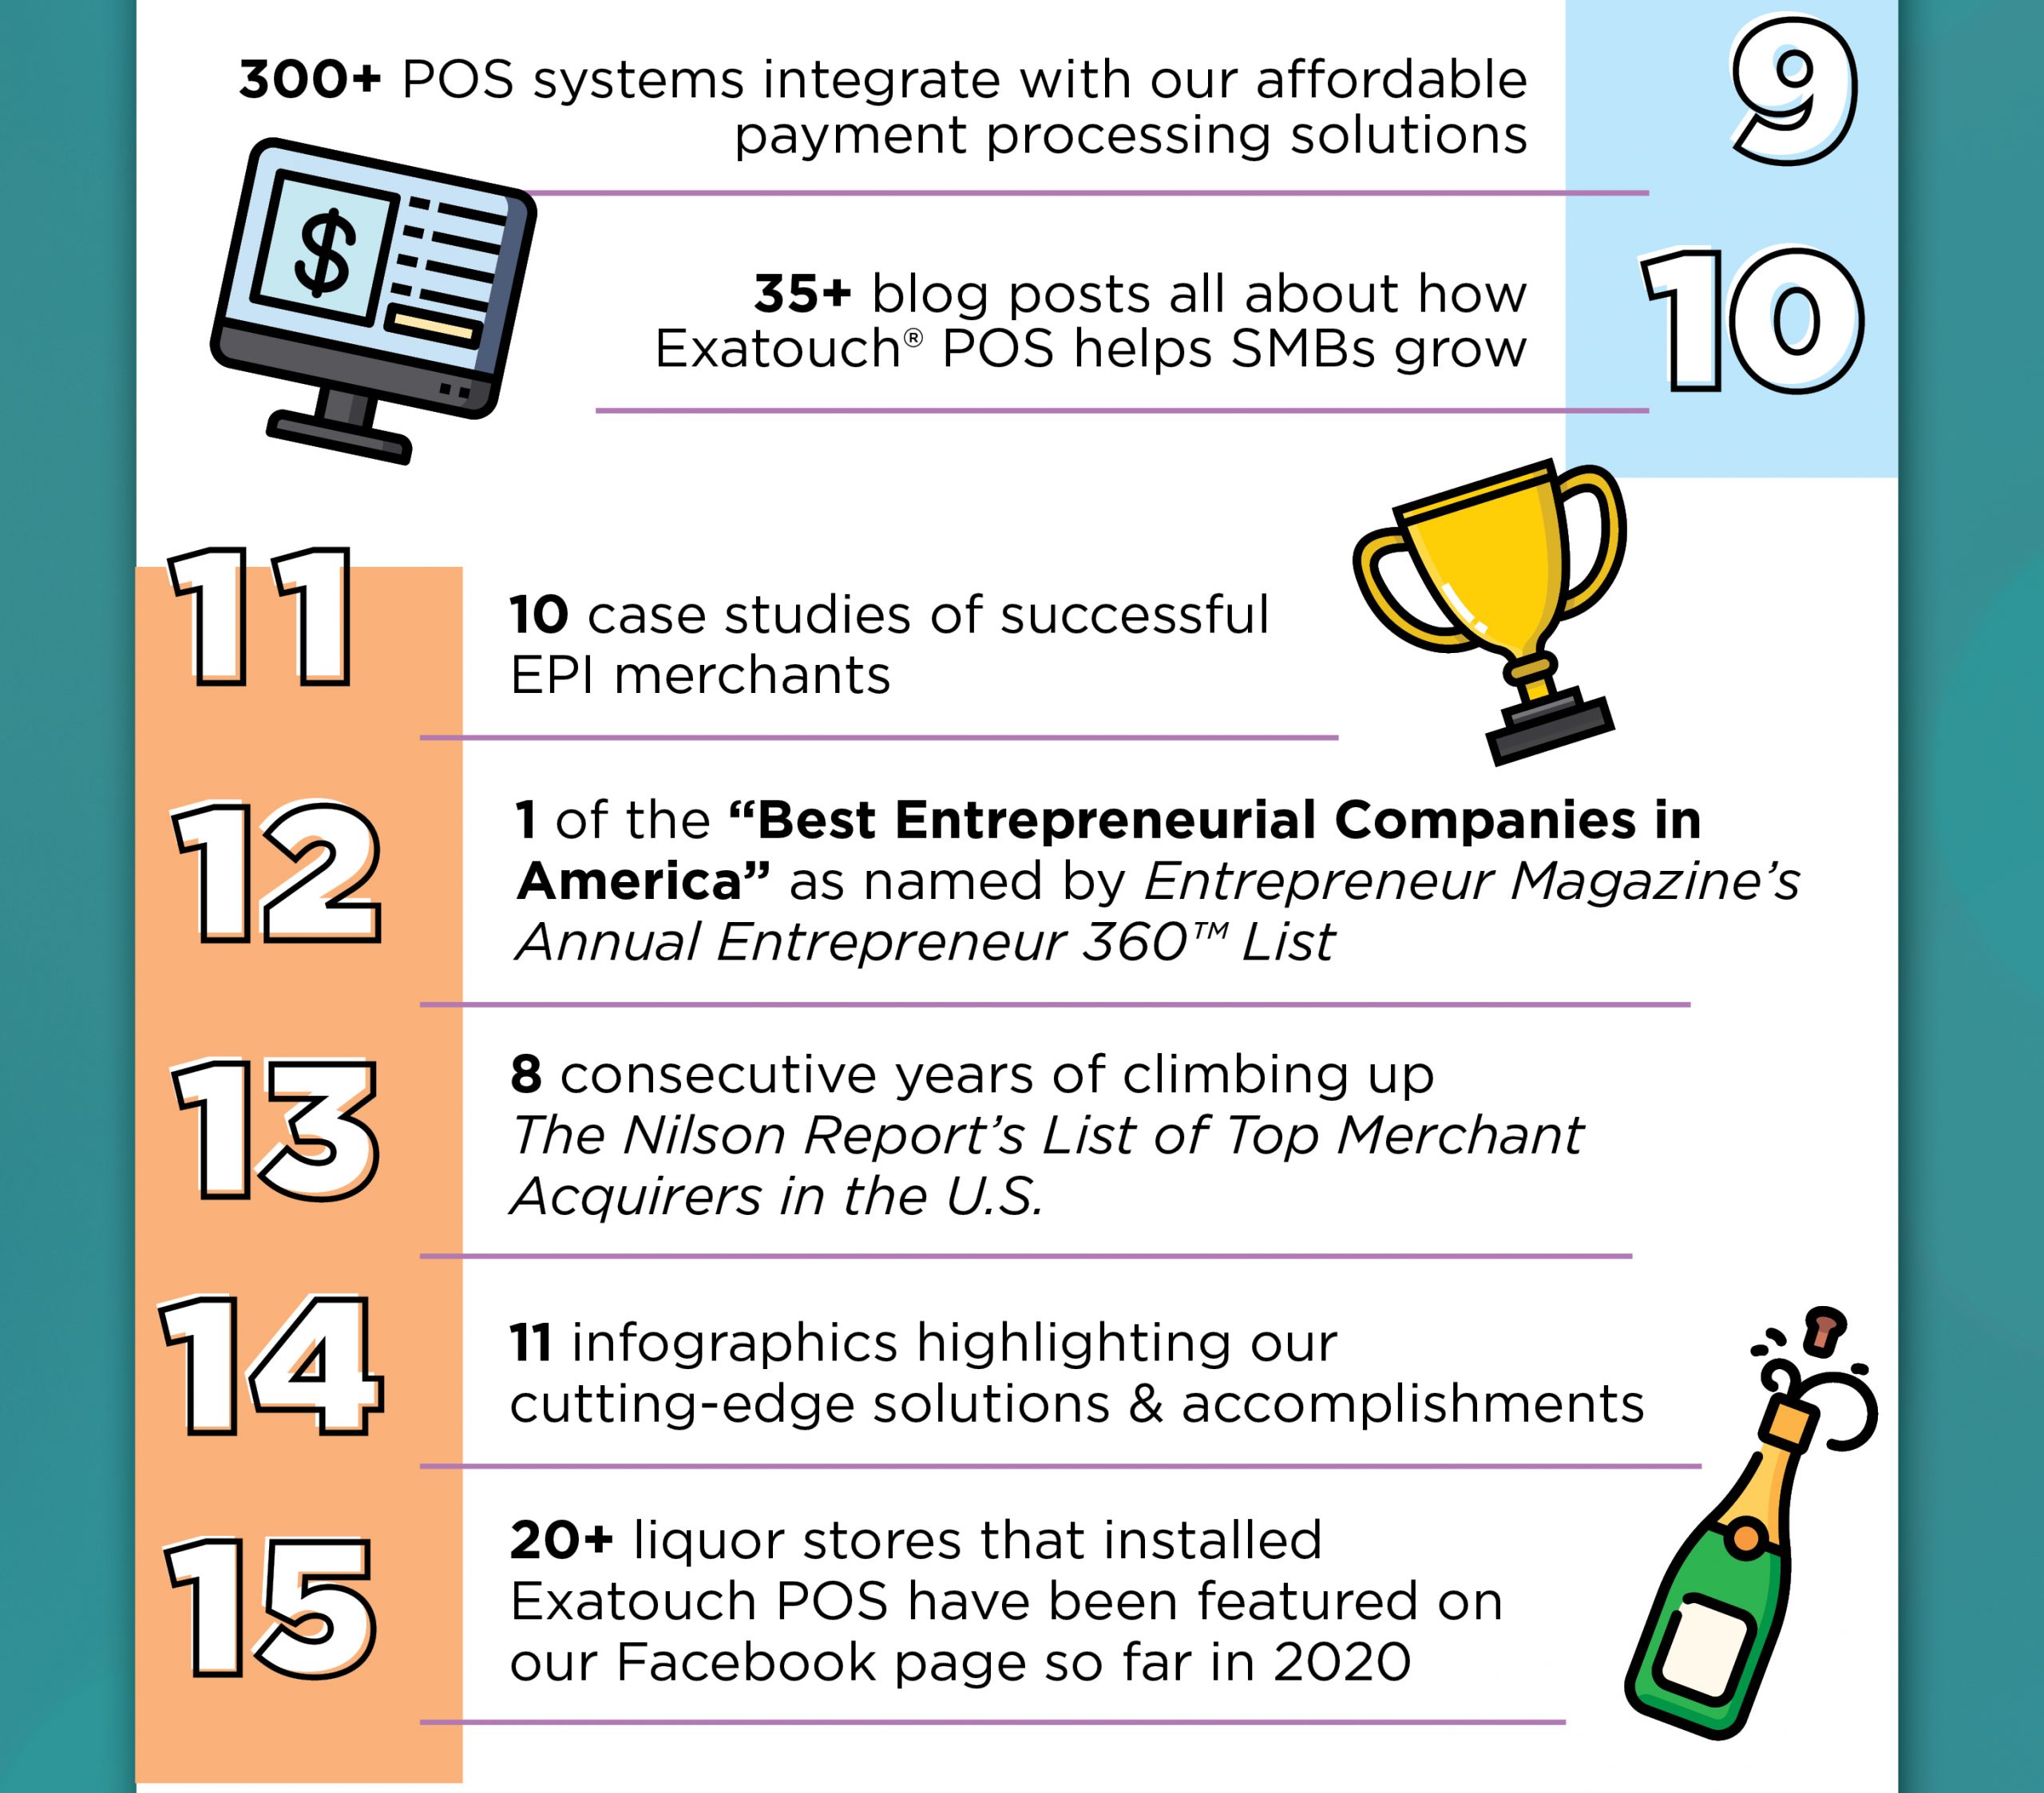 20 Reasons We're Celebrating 20 Years of Success